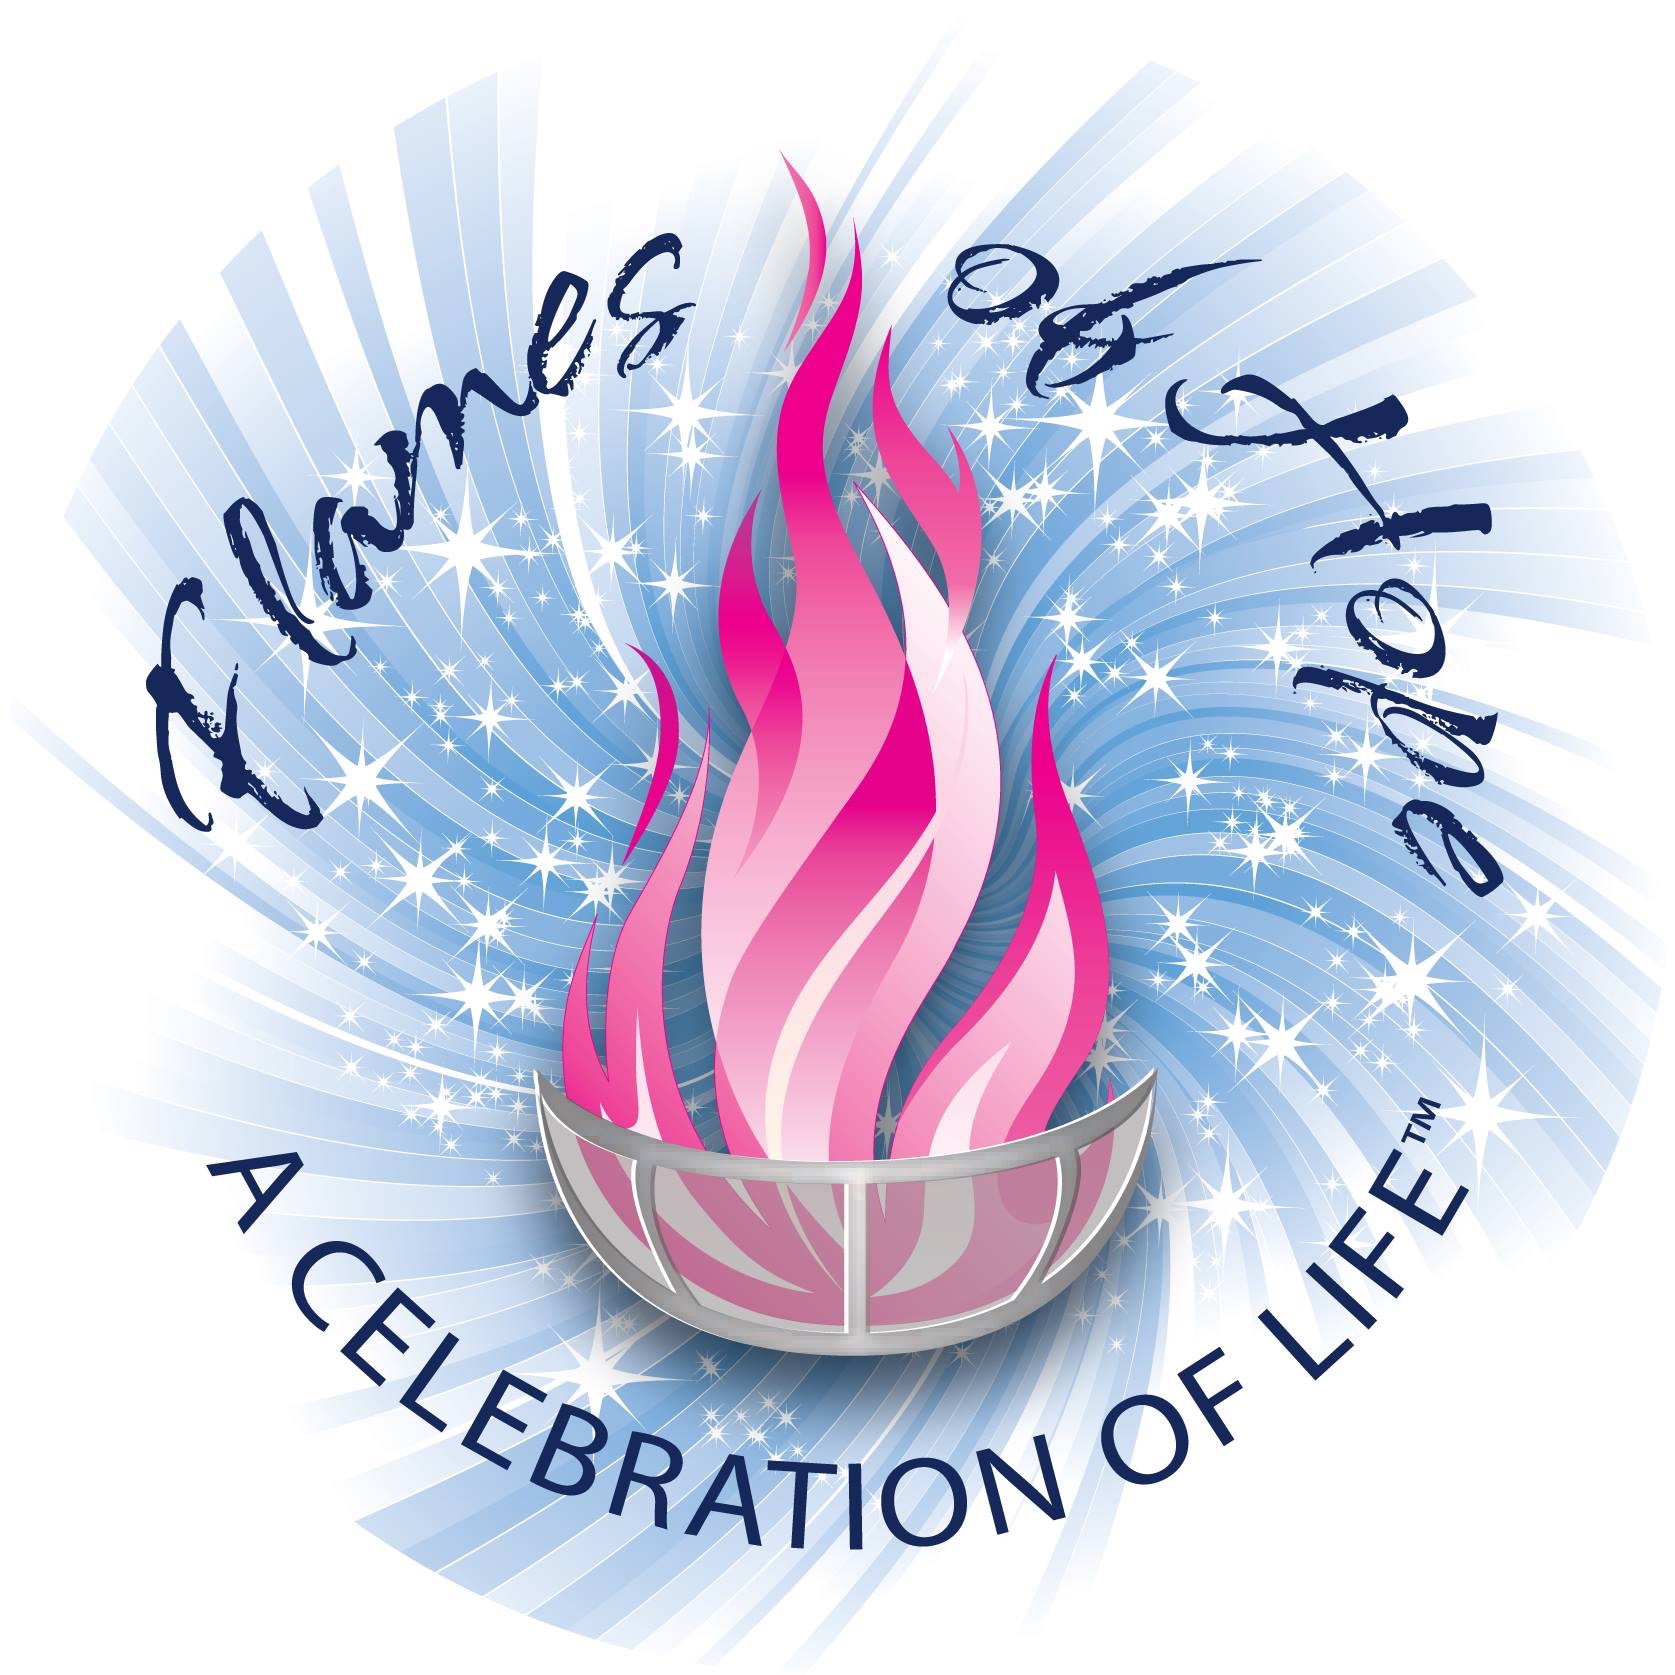 Flames of Hope event October 1st Isabella's Boutique will be there from 4pm to Midnight.